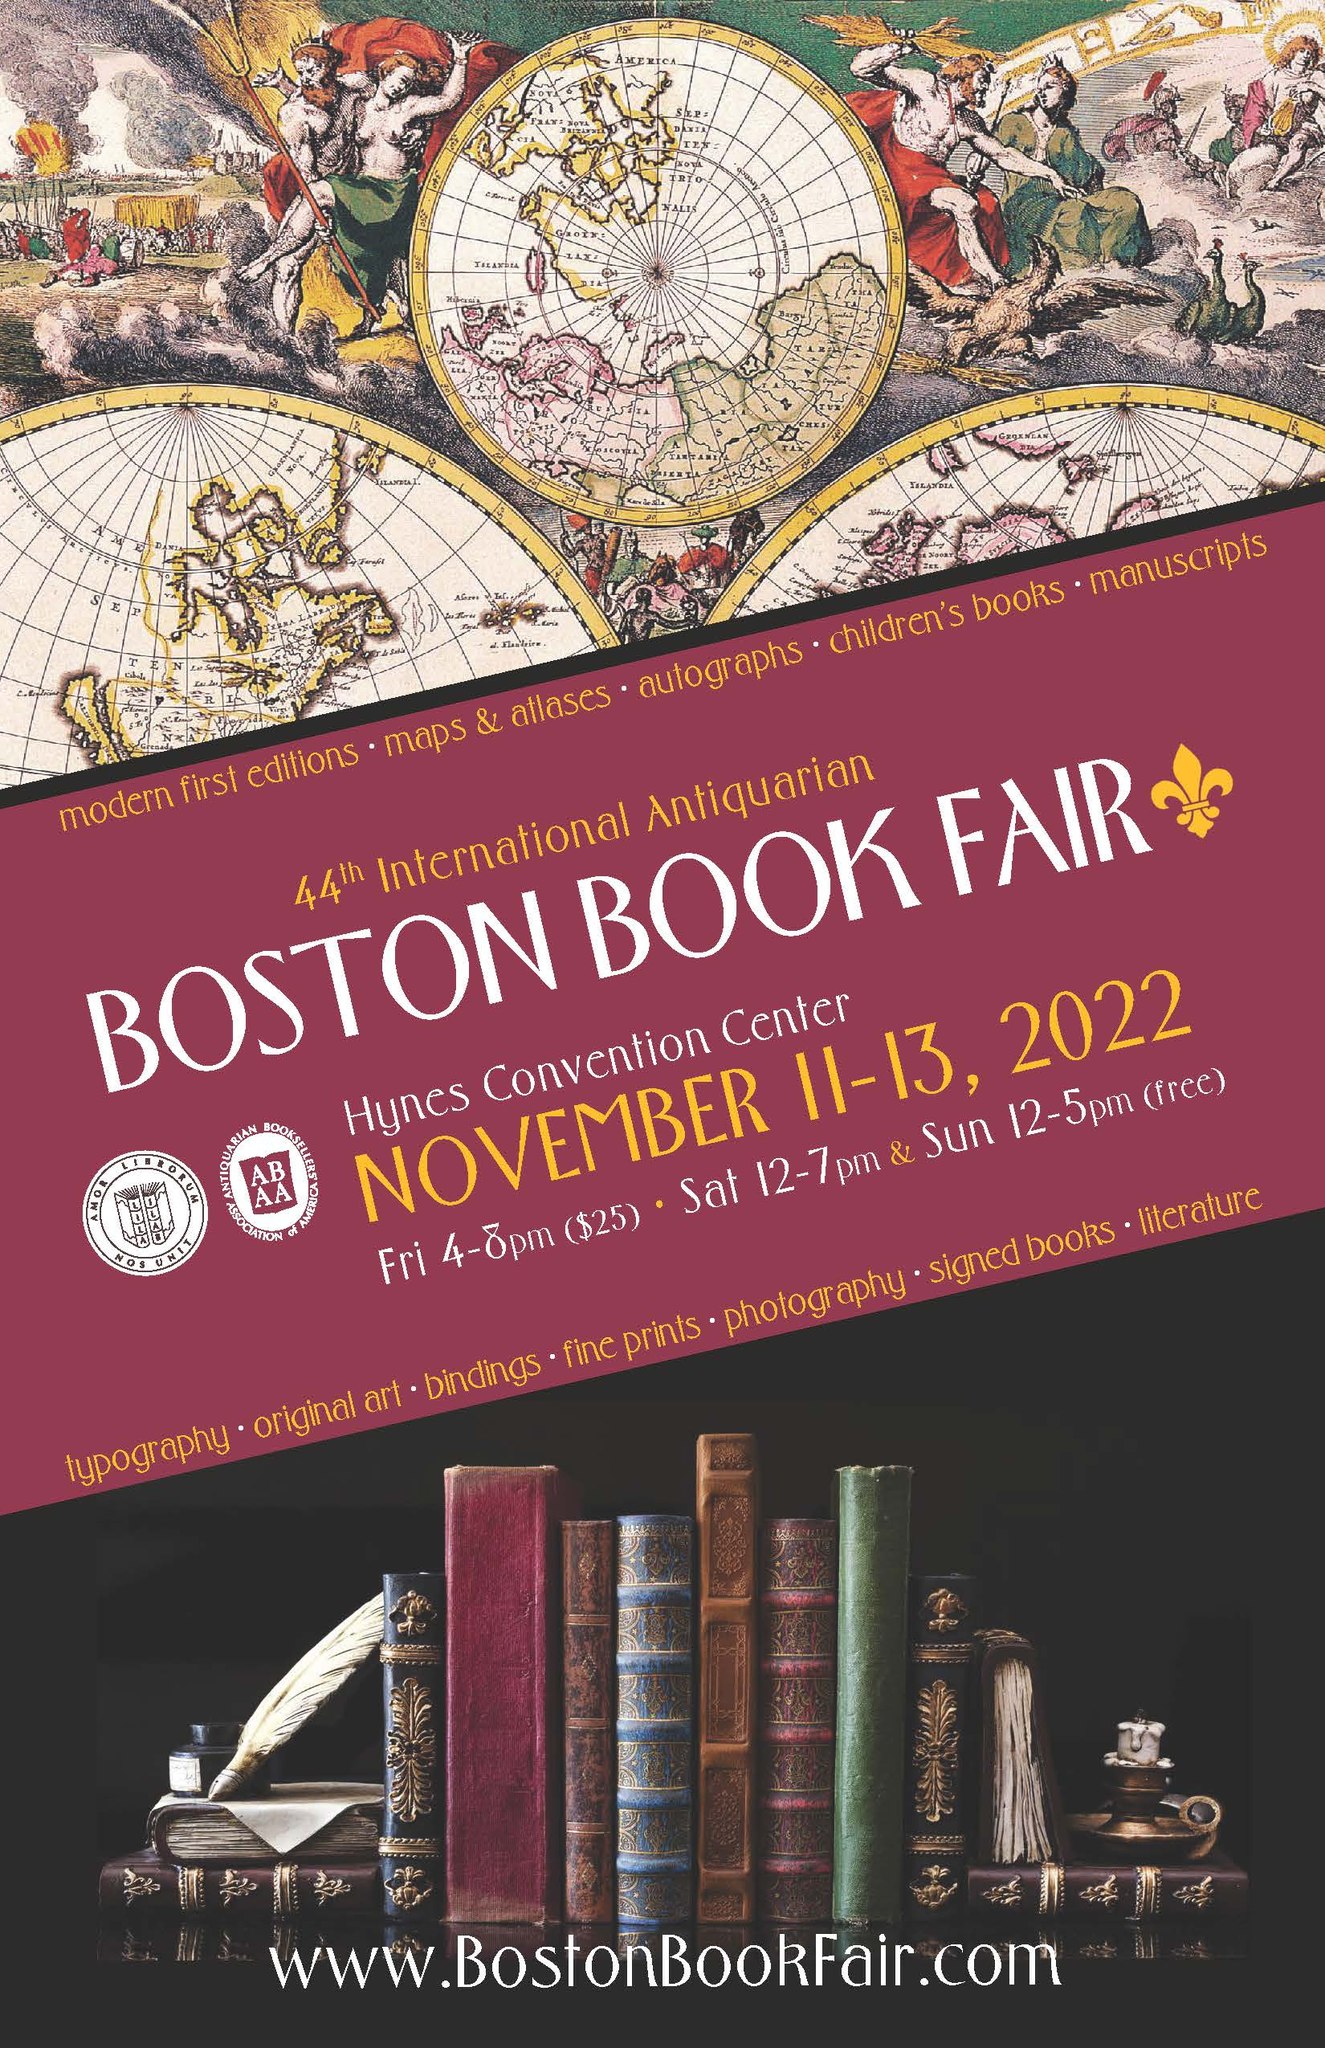 Boston Book Fair 2022 The New Antiquarian The Blog of The